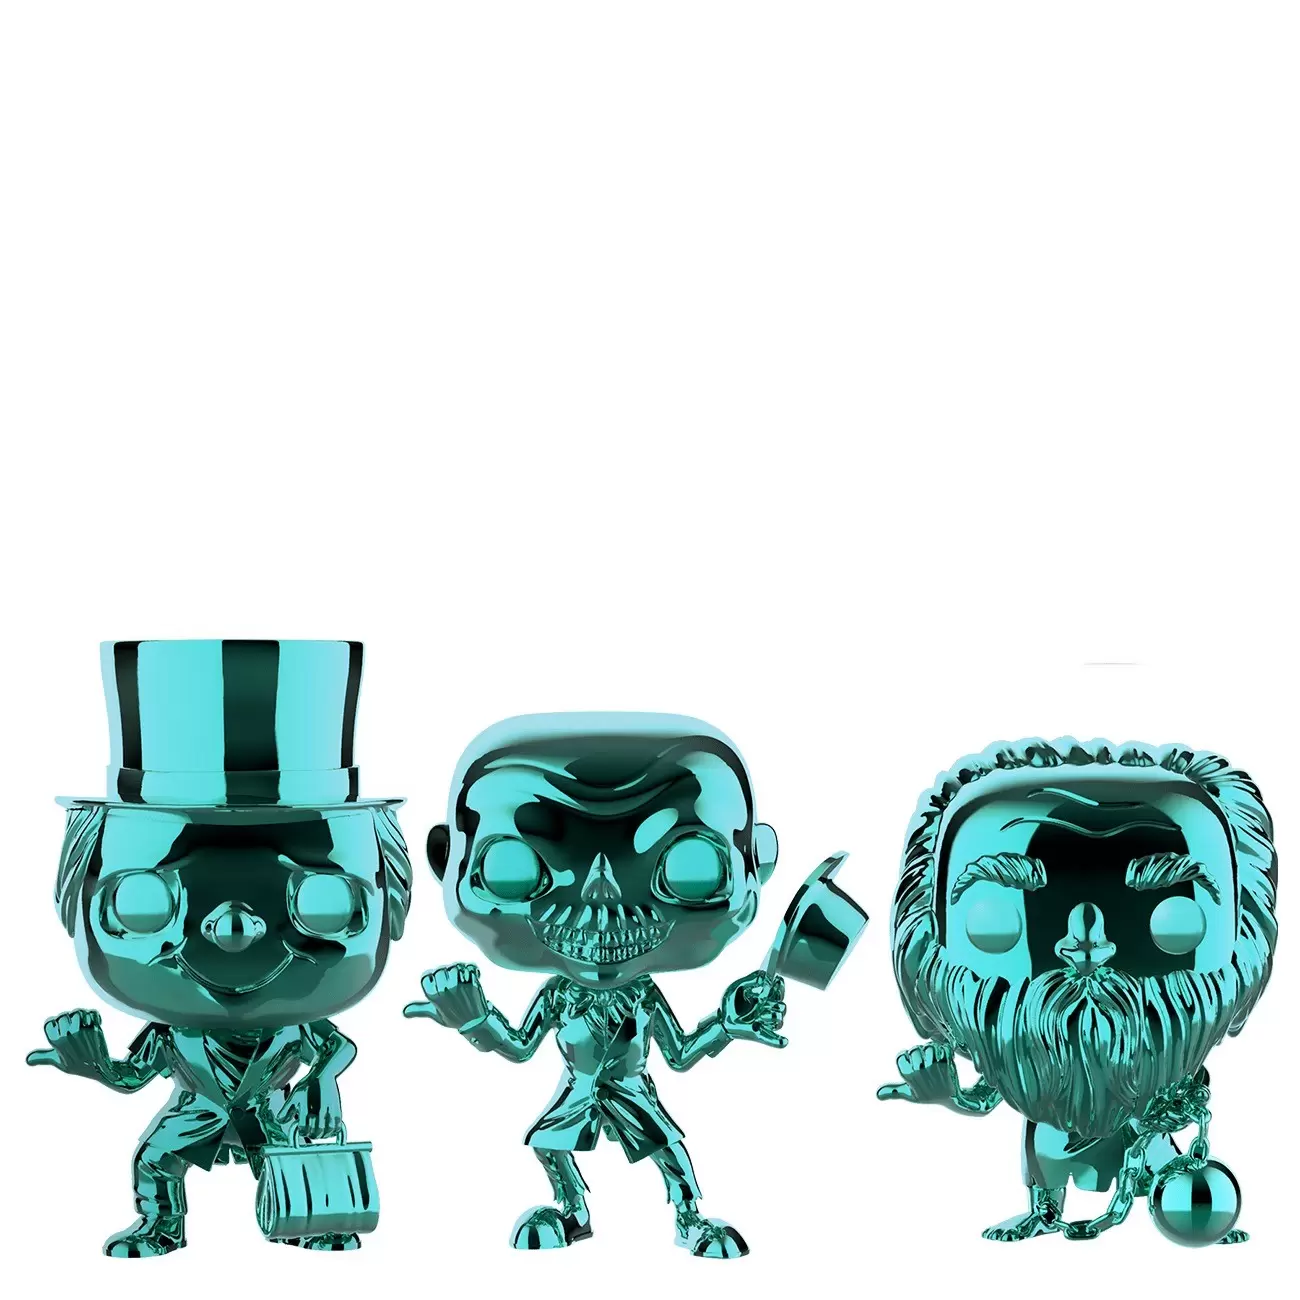 POP! Disney - The Haunted Mansion - Hitchhiking Ghosts Chrome 3 Pack